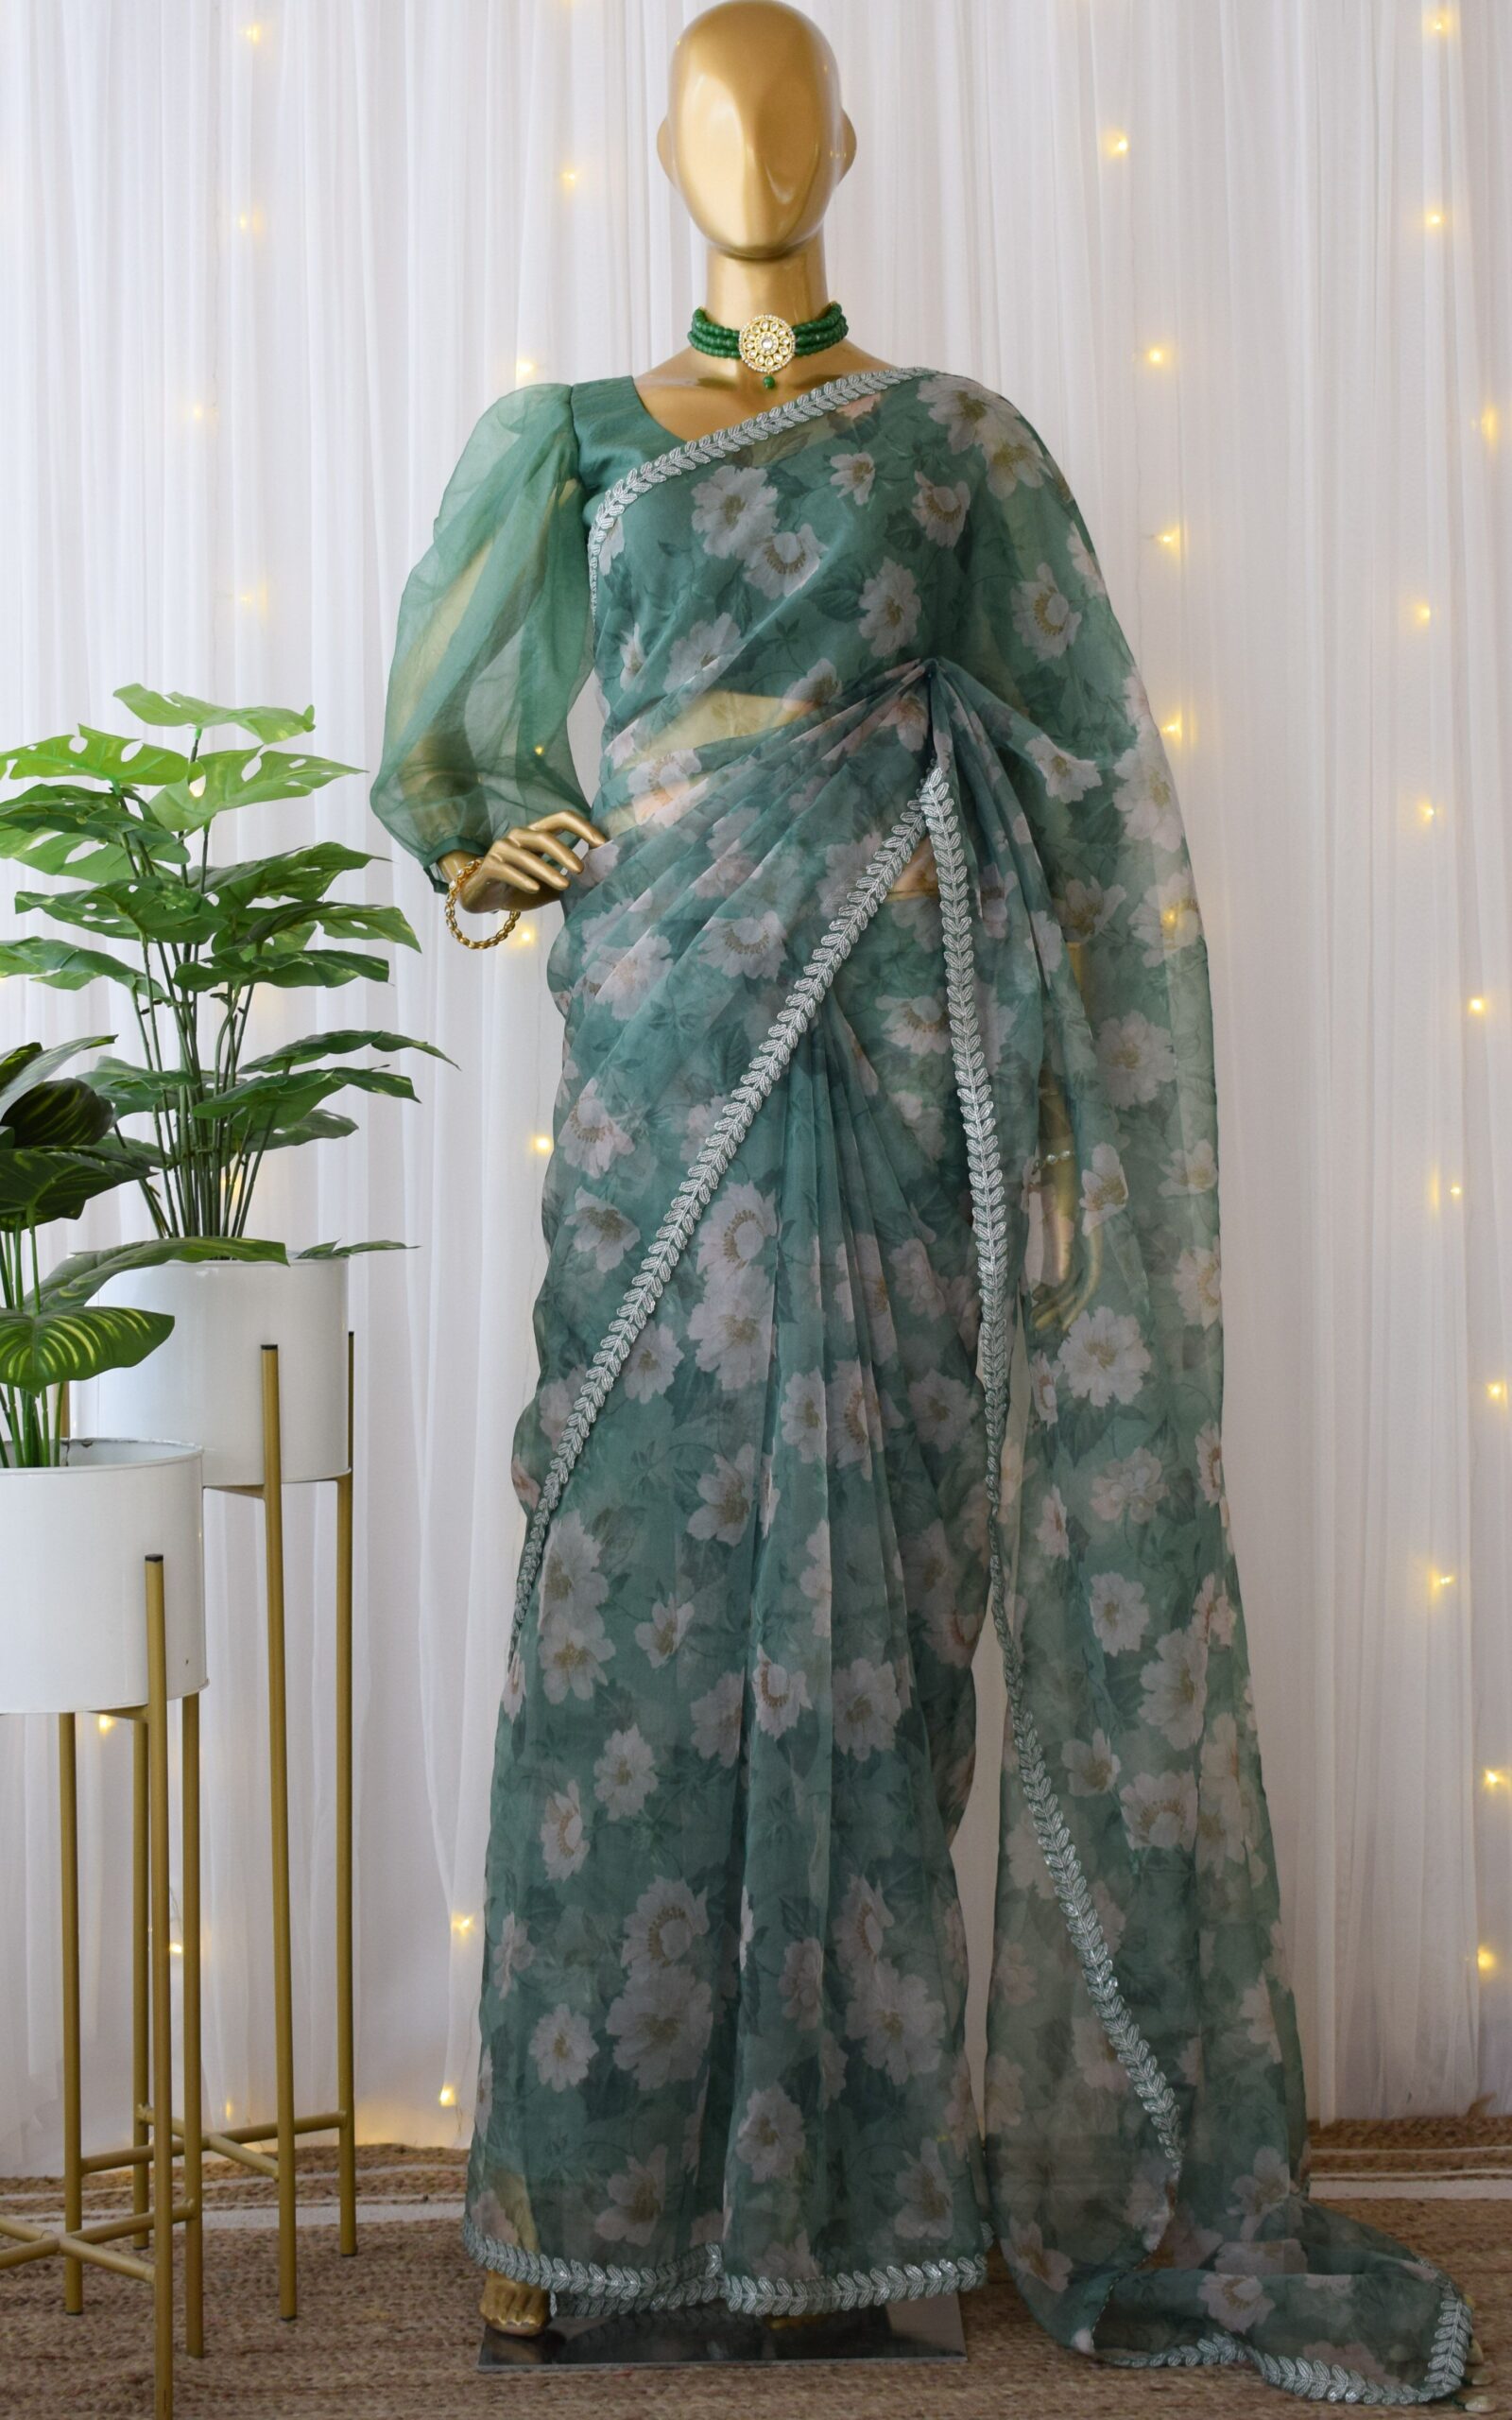 Floral Fantasy: Drape Yourself in Floral Sarees